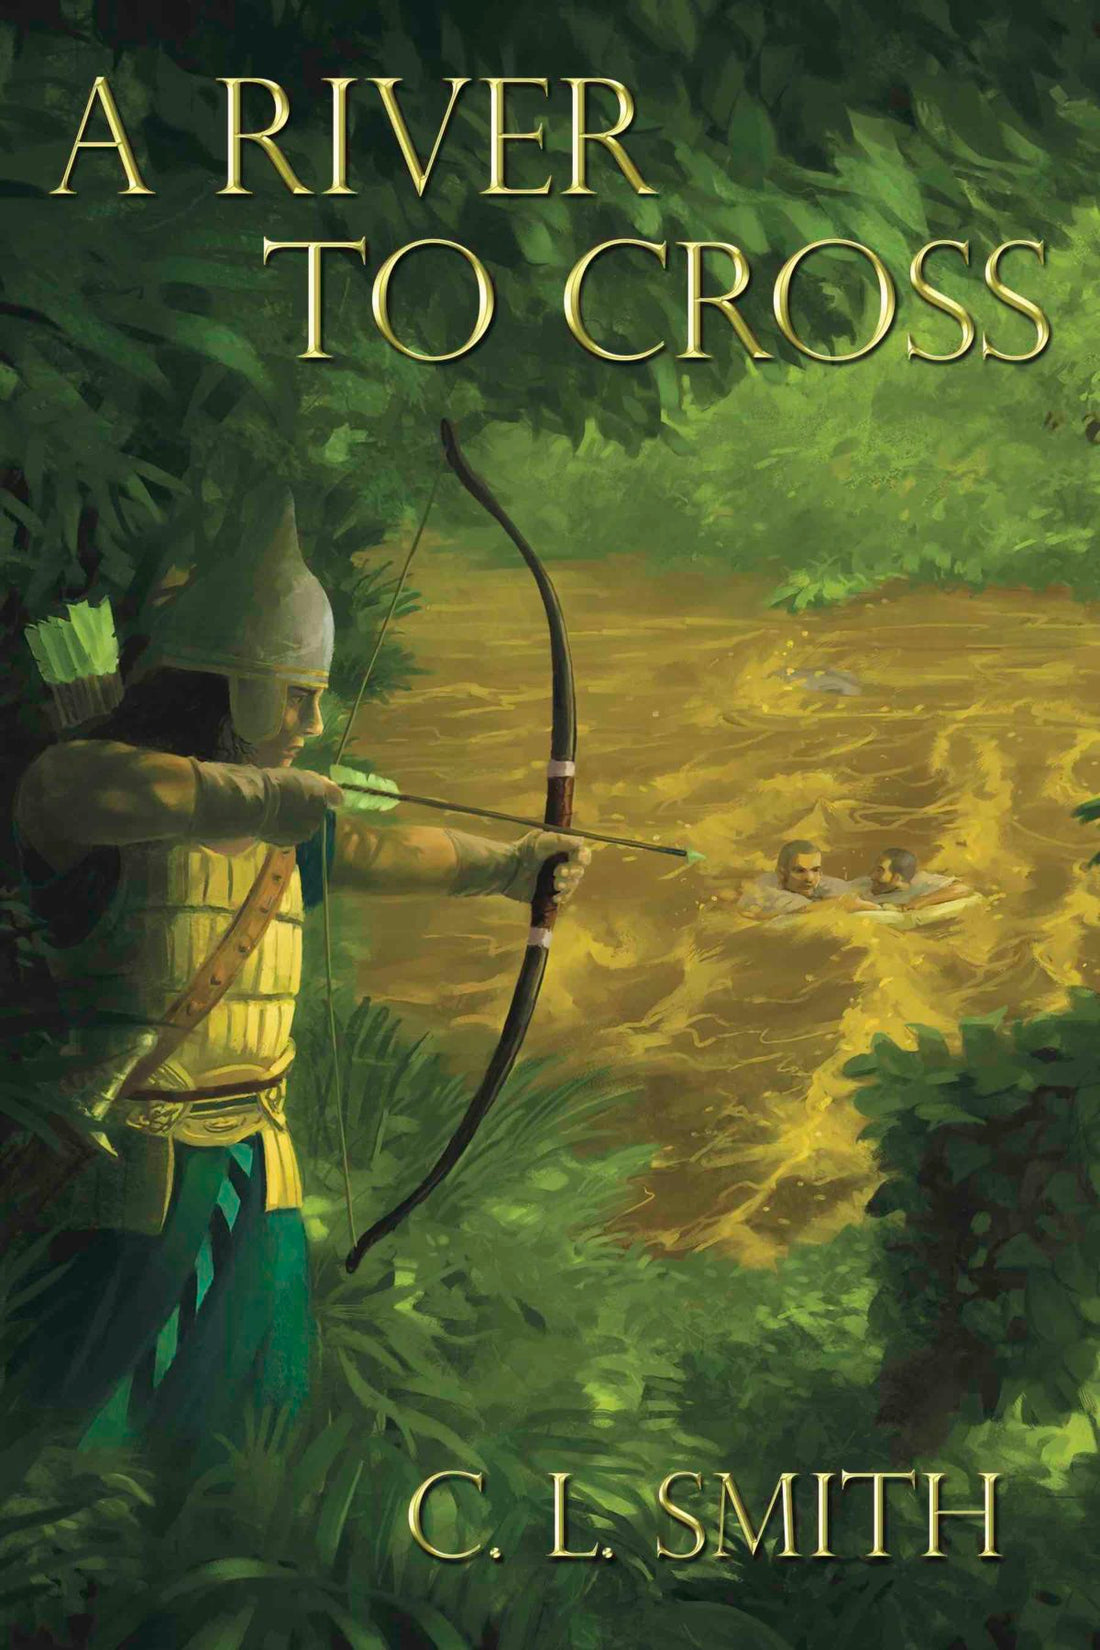 "A River to Cross" by C.L. Smith -- Author Interview, Blog Tour, and Giveaway